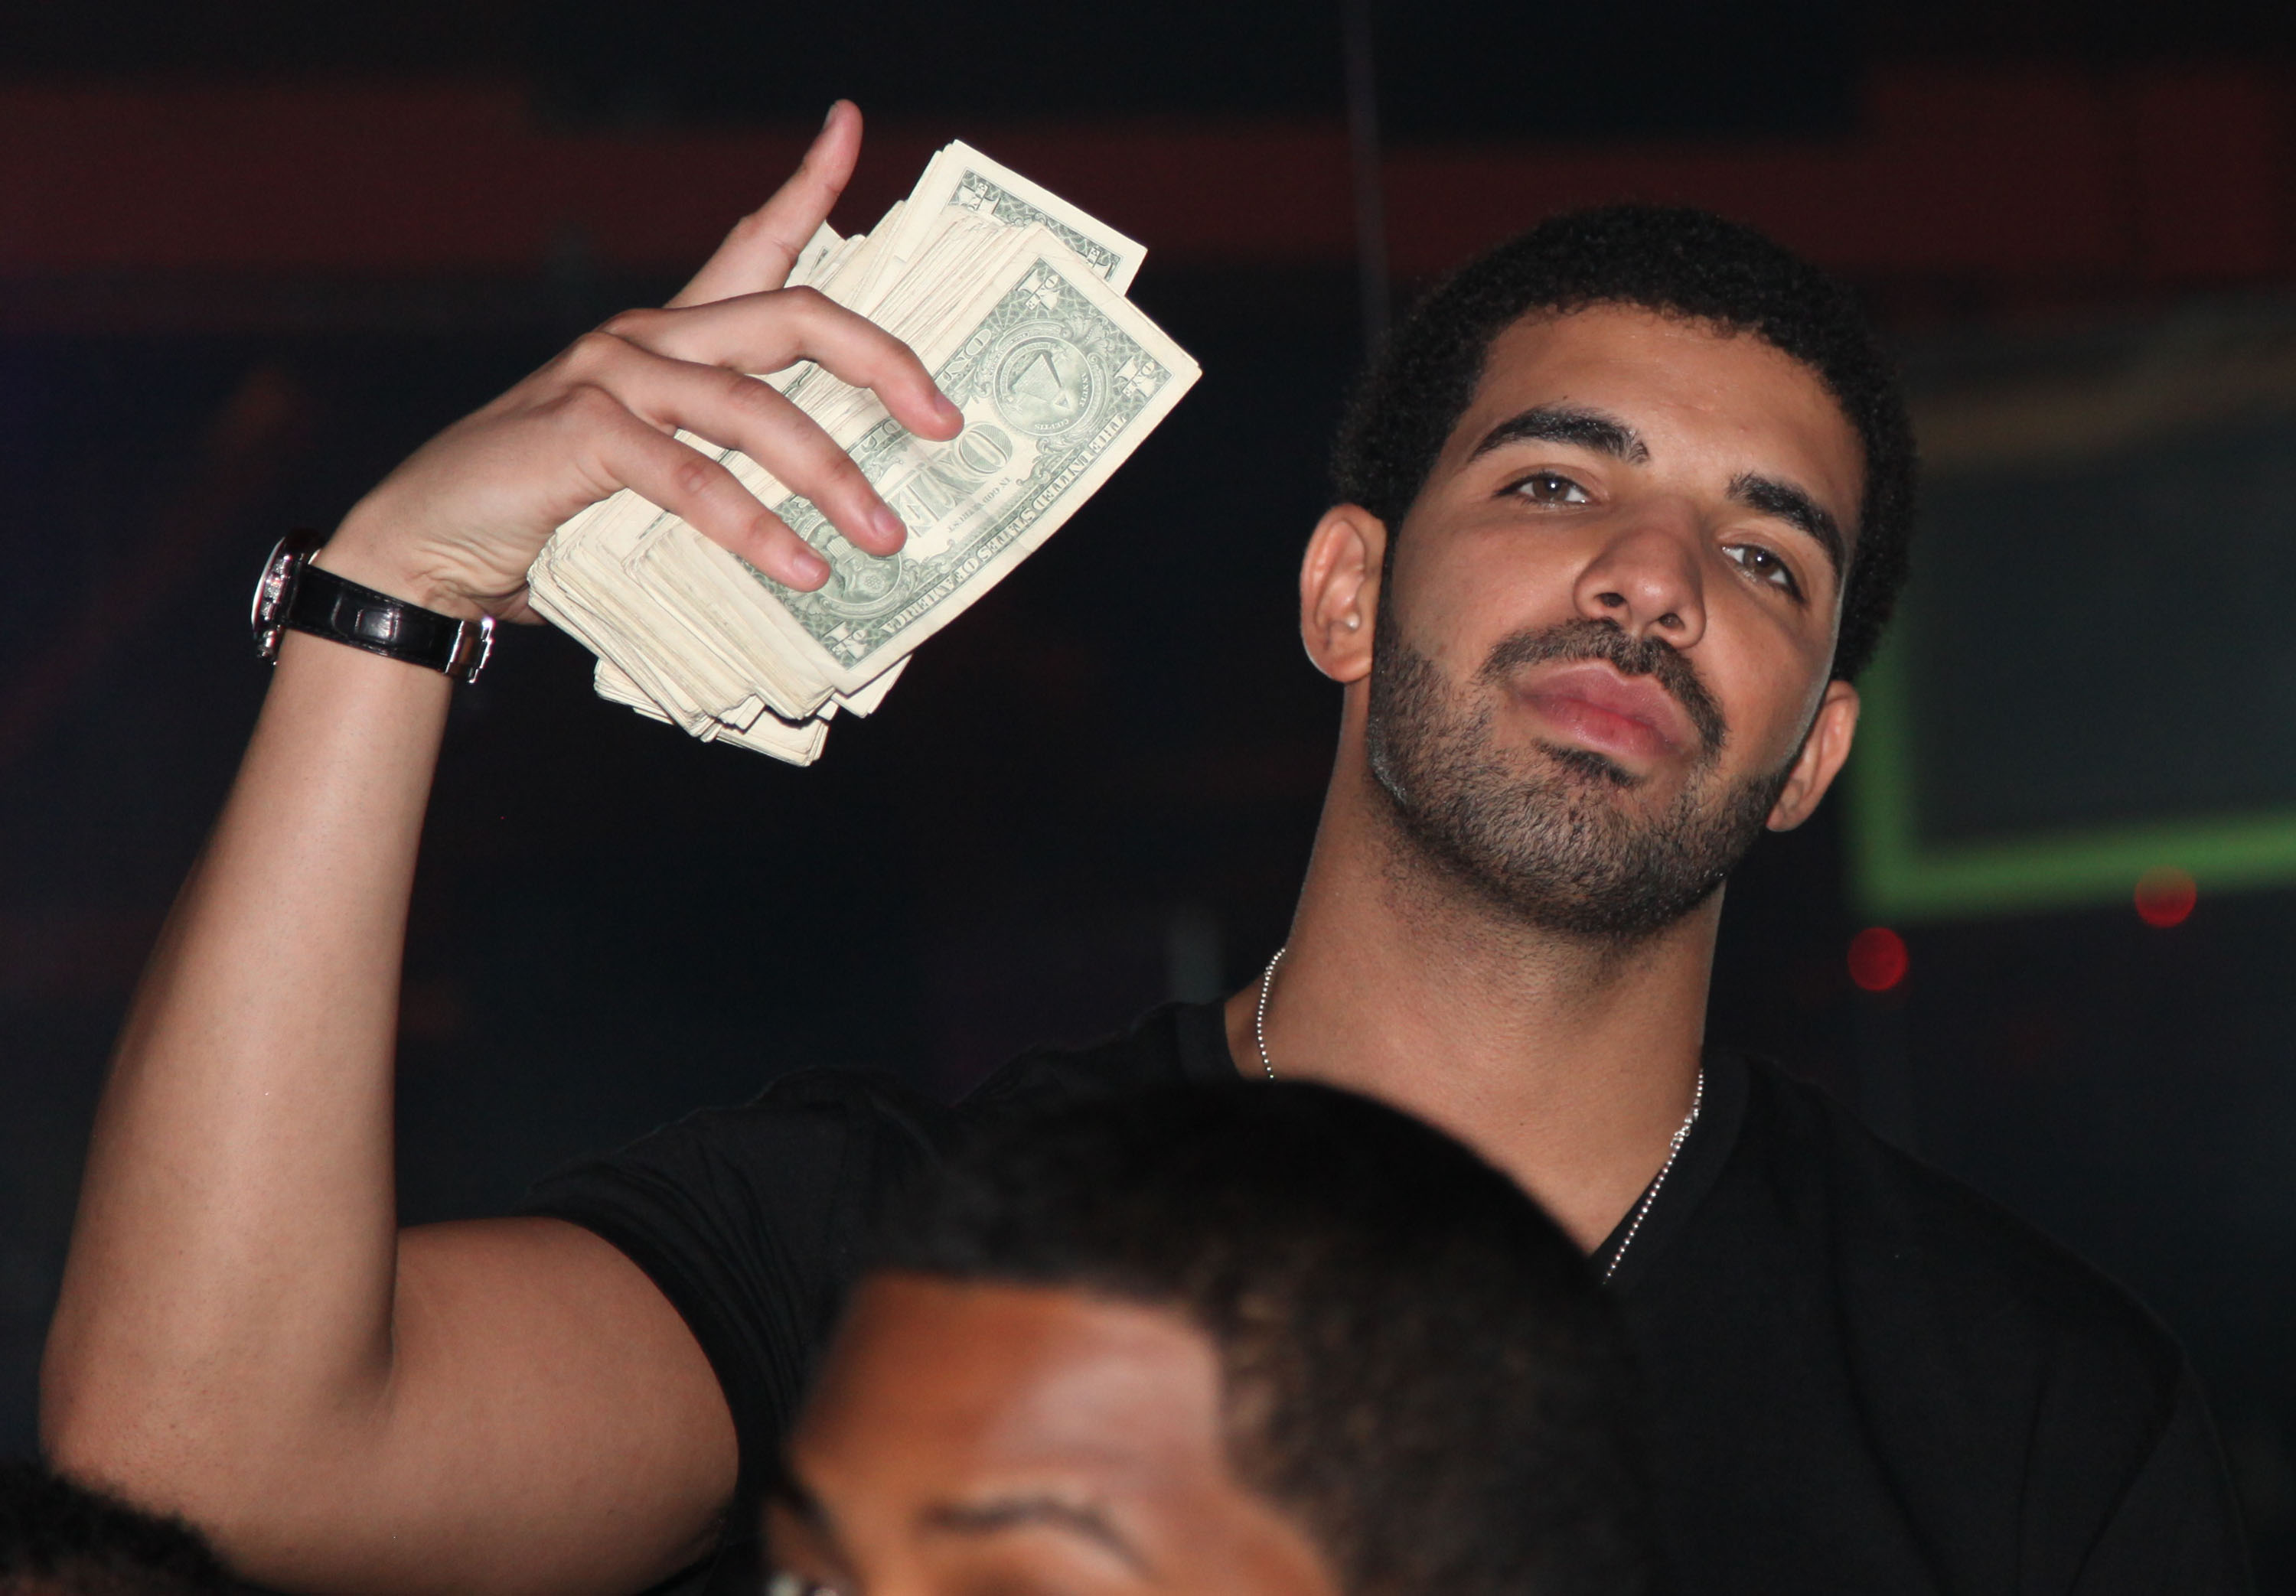 Drake at an event